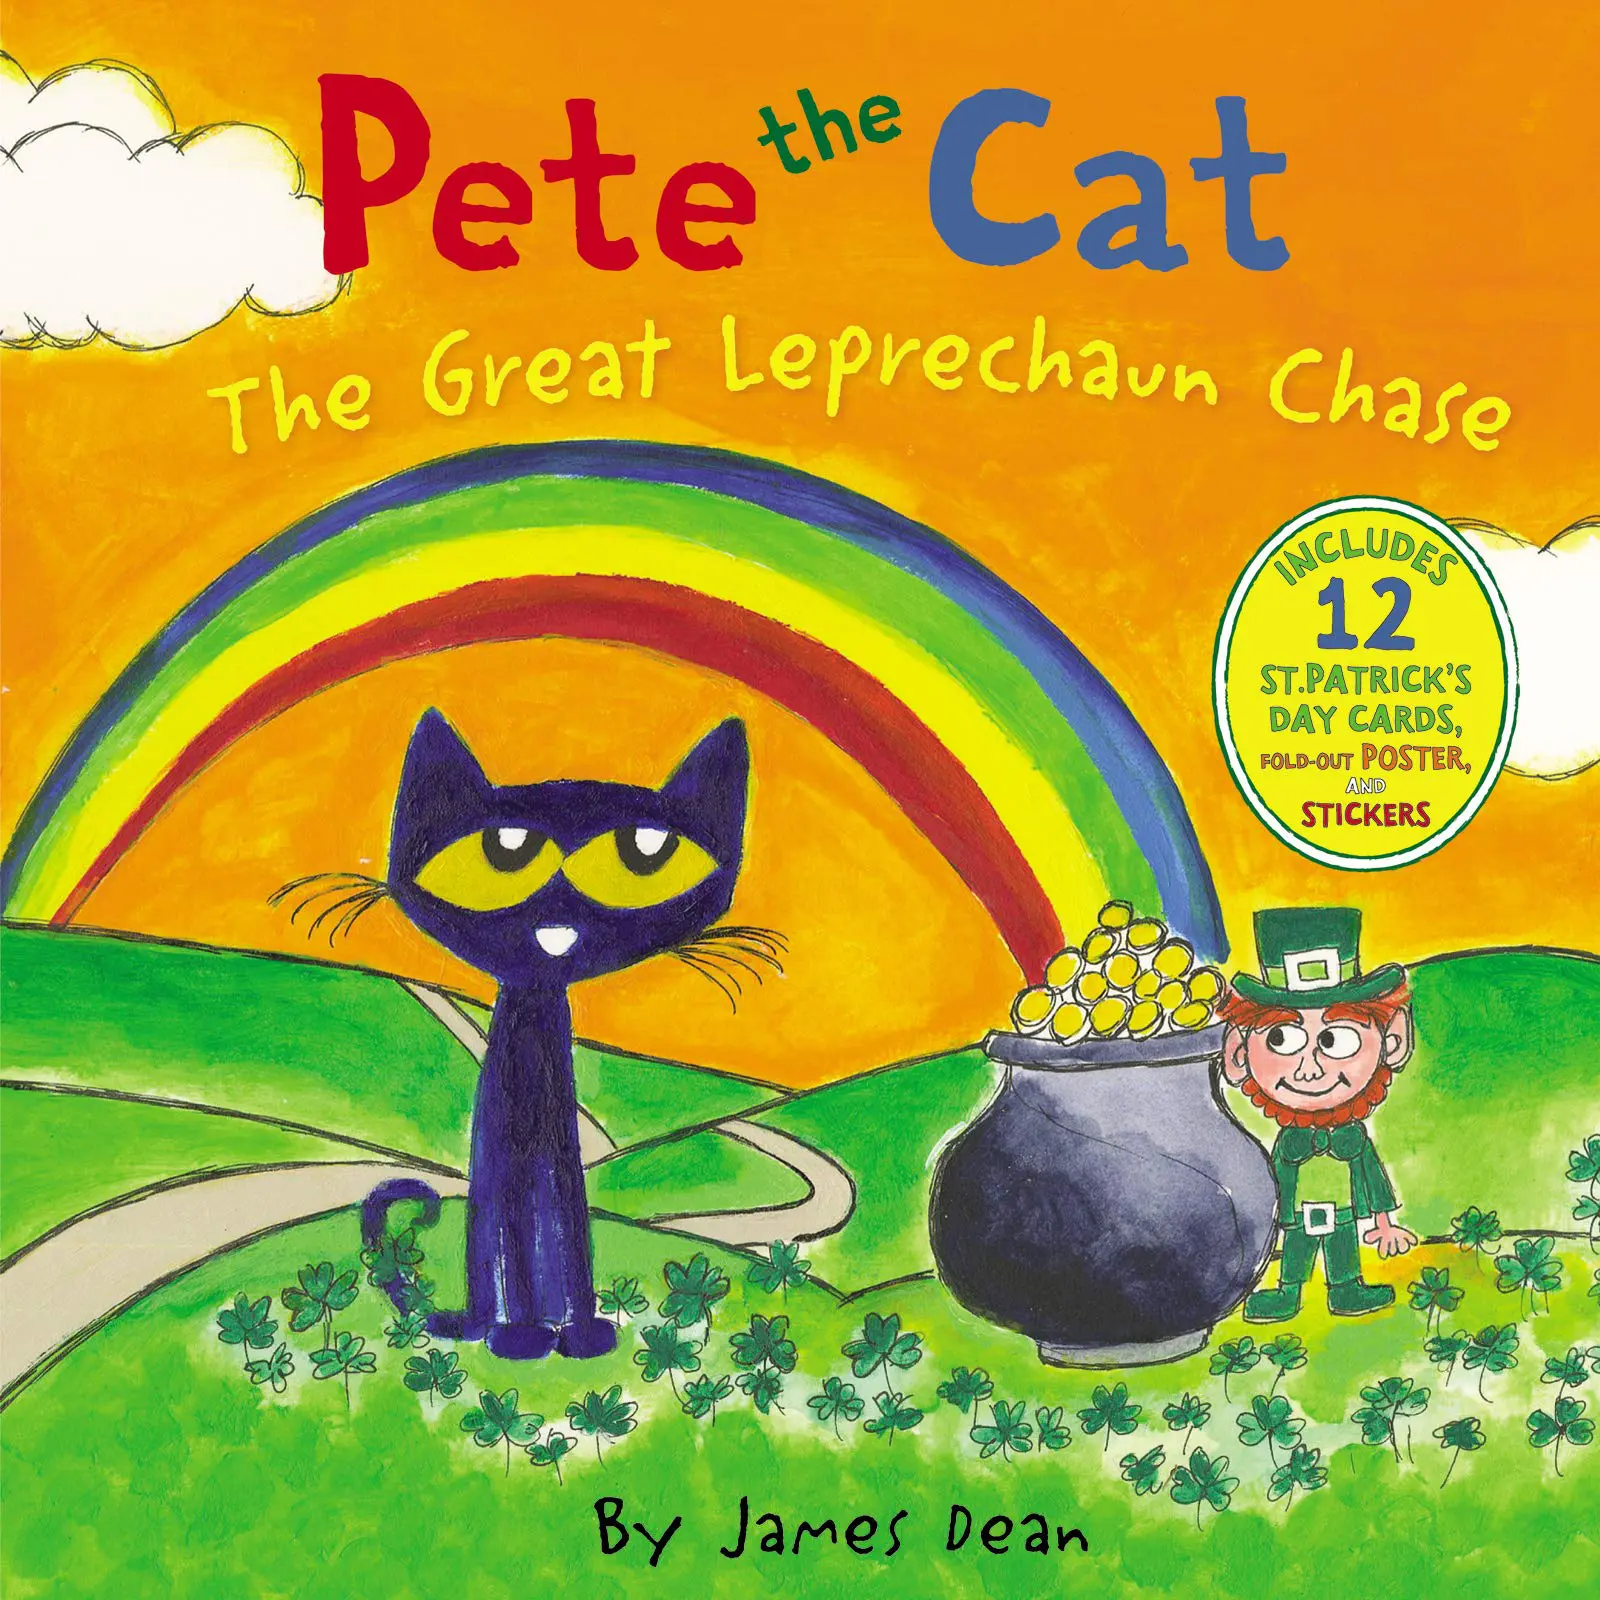 pet the cat st patrick's day book 